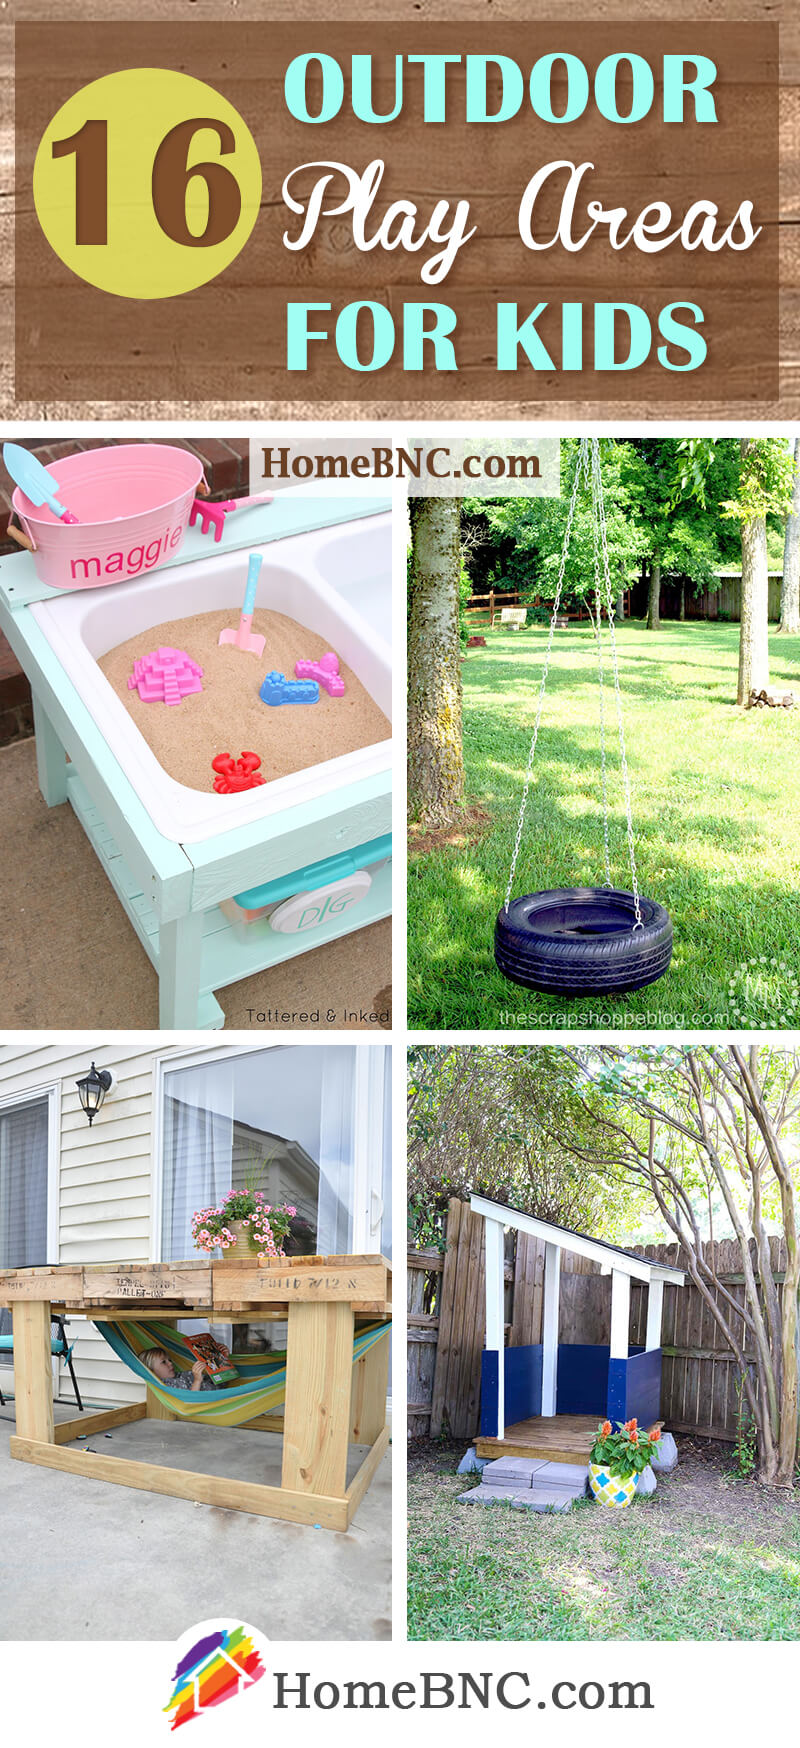 Outdoor Play Area Ideas for Kids